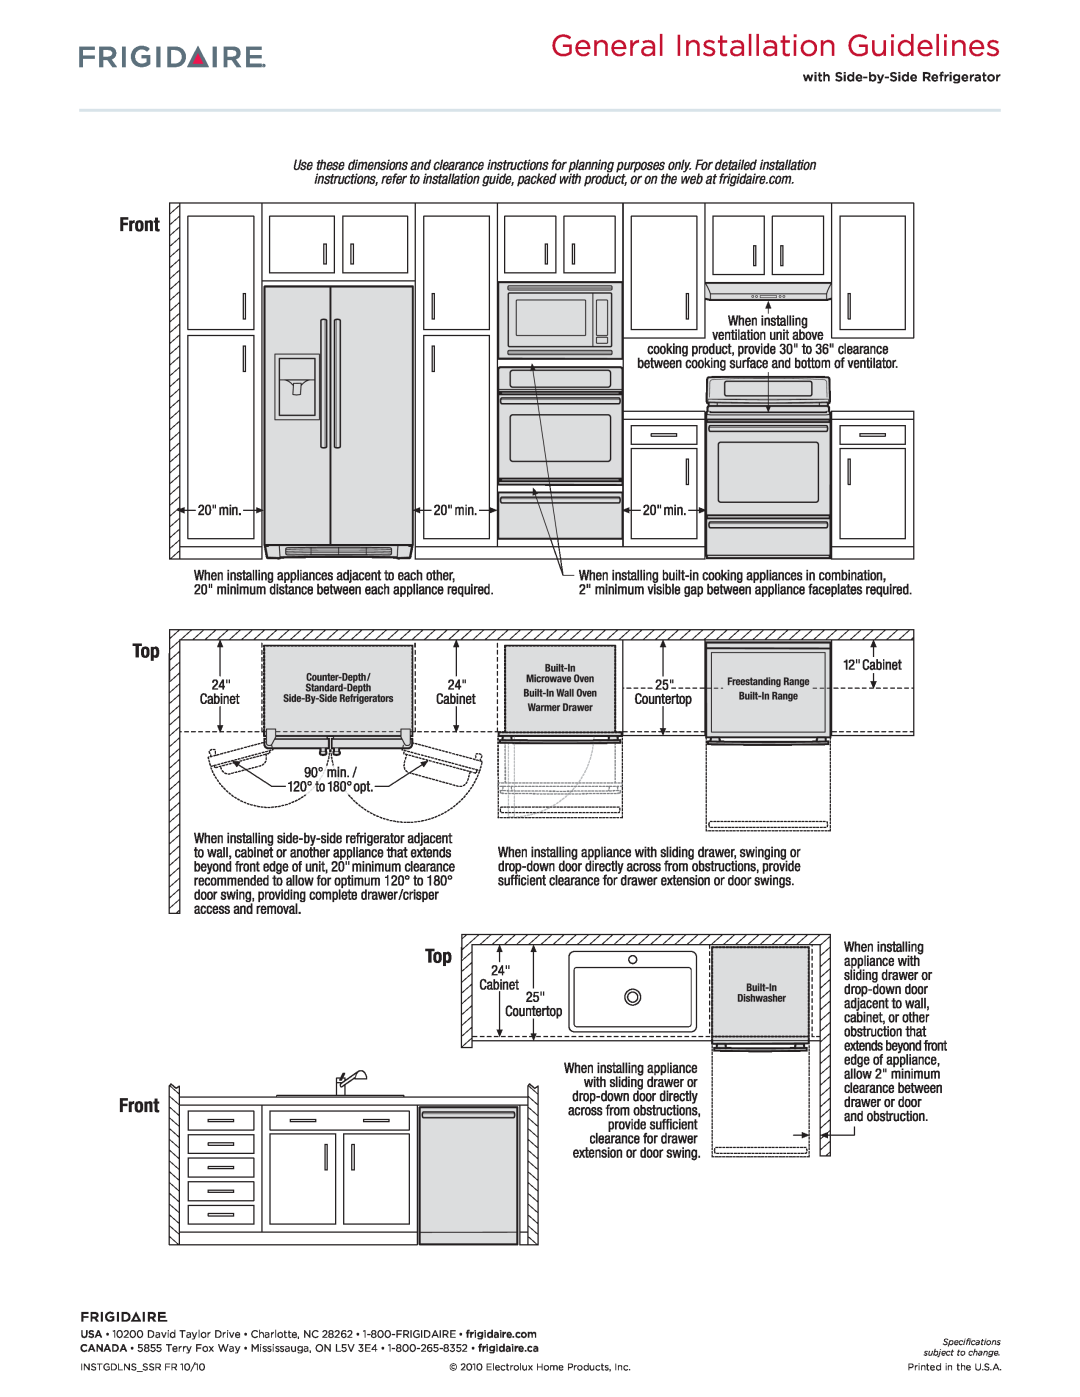 Frigidaire FFEF3048L S dimensions General Installation Guidelines, Top Front 